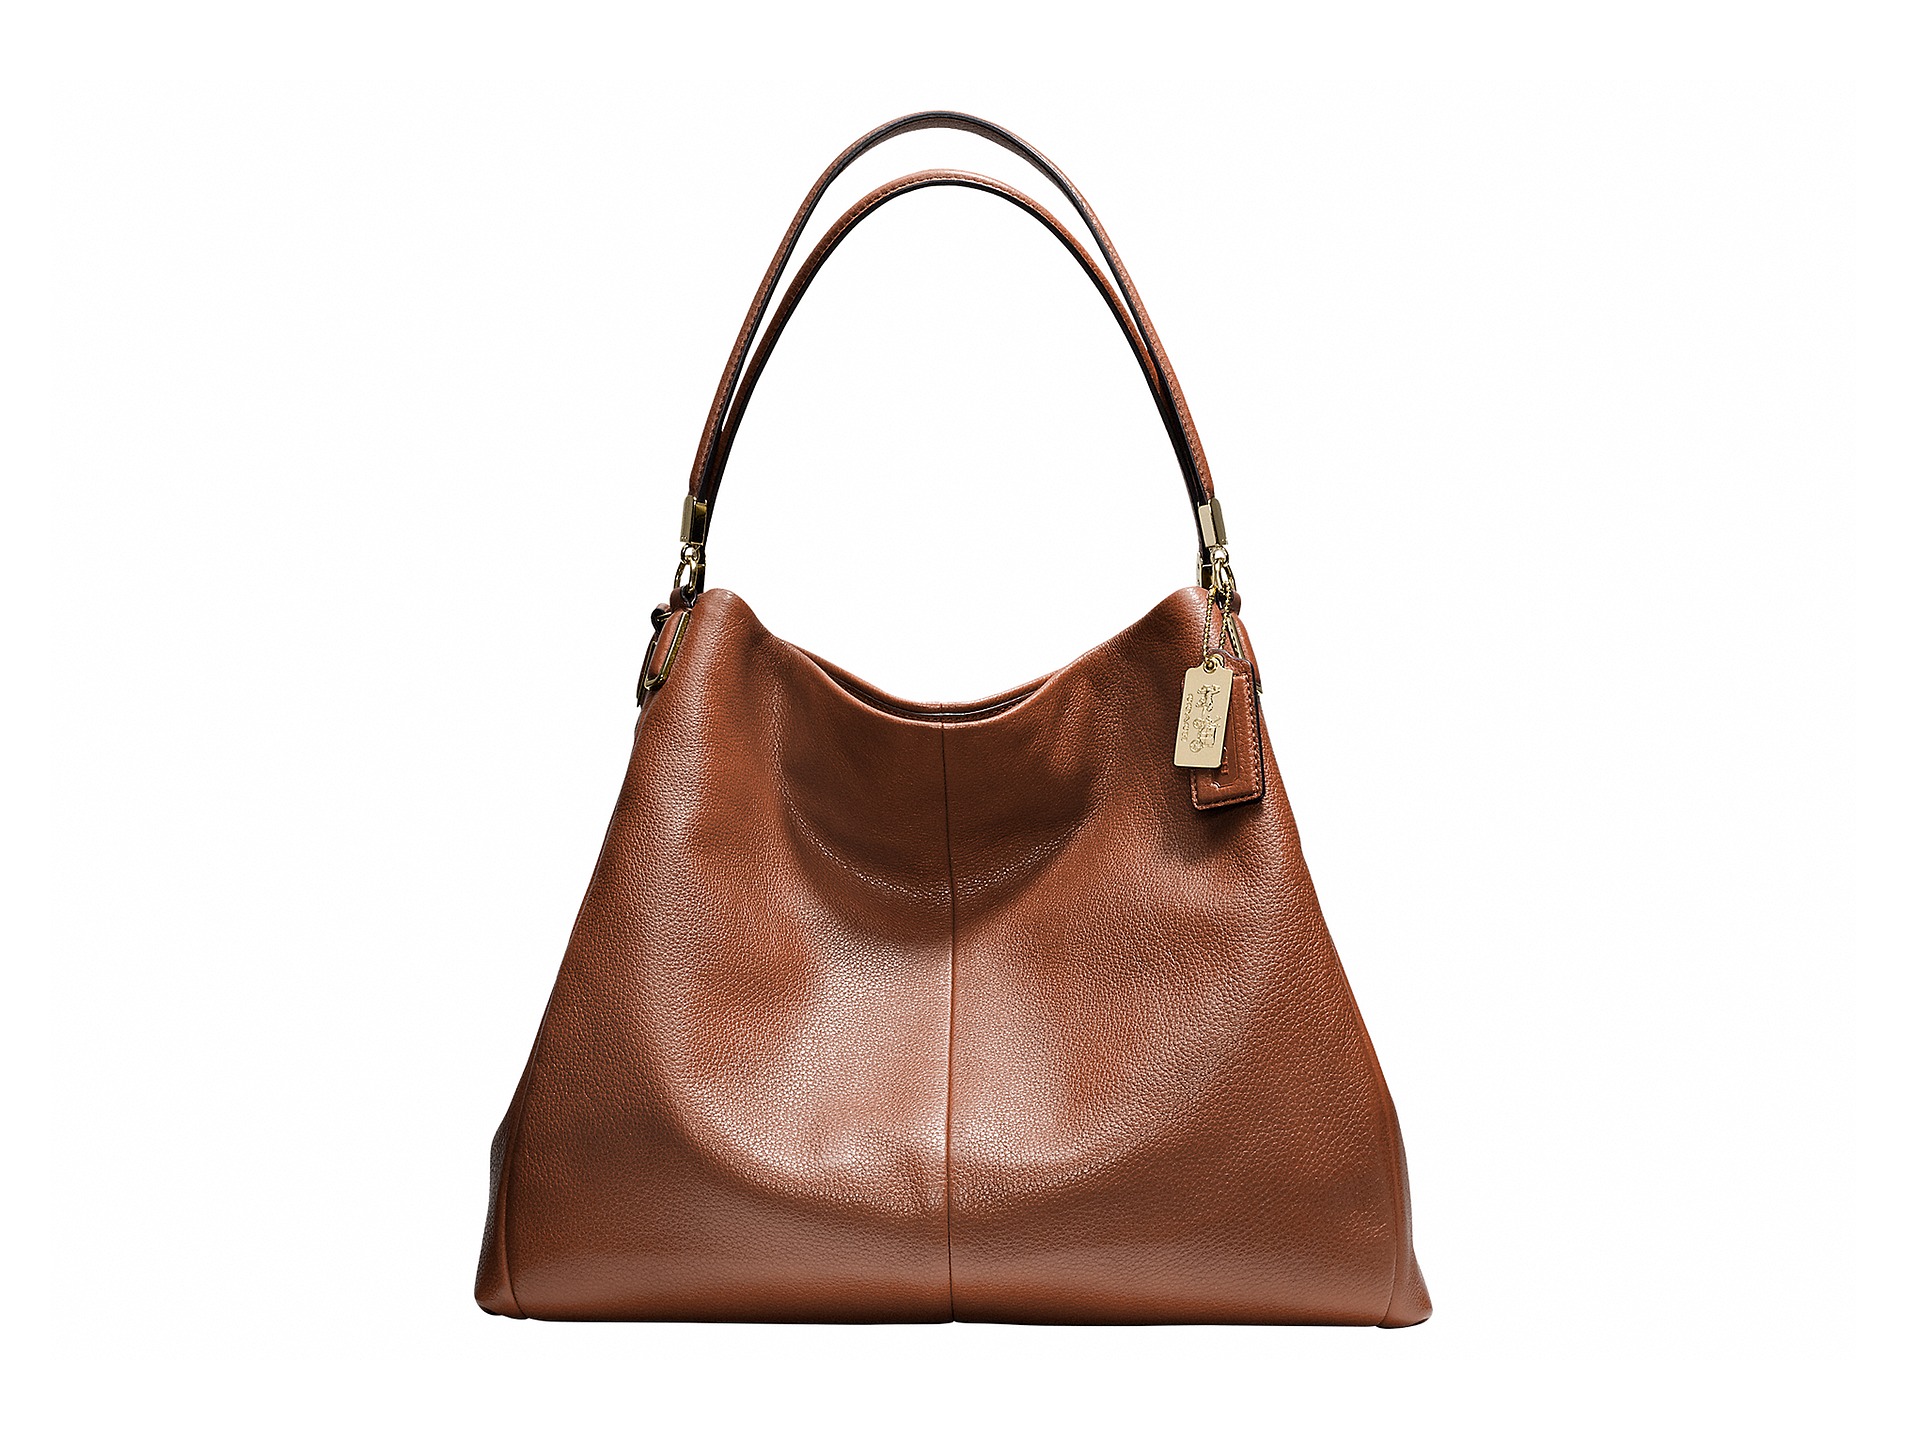 Coach Madison Phoebe Leather Shoulder Bag | Shipped Free at Zappos